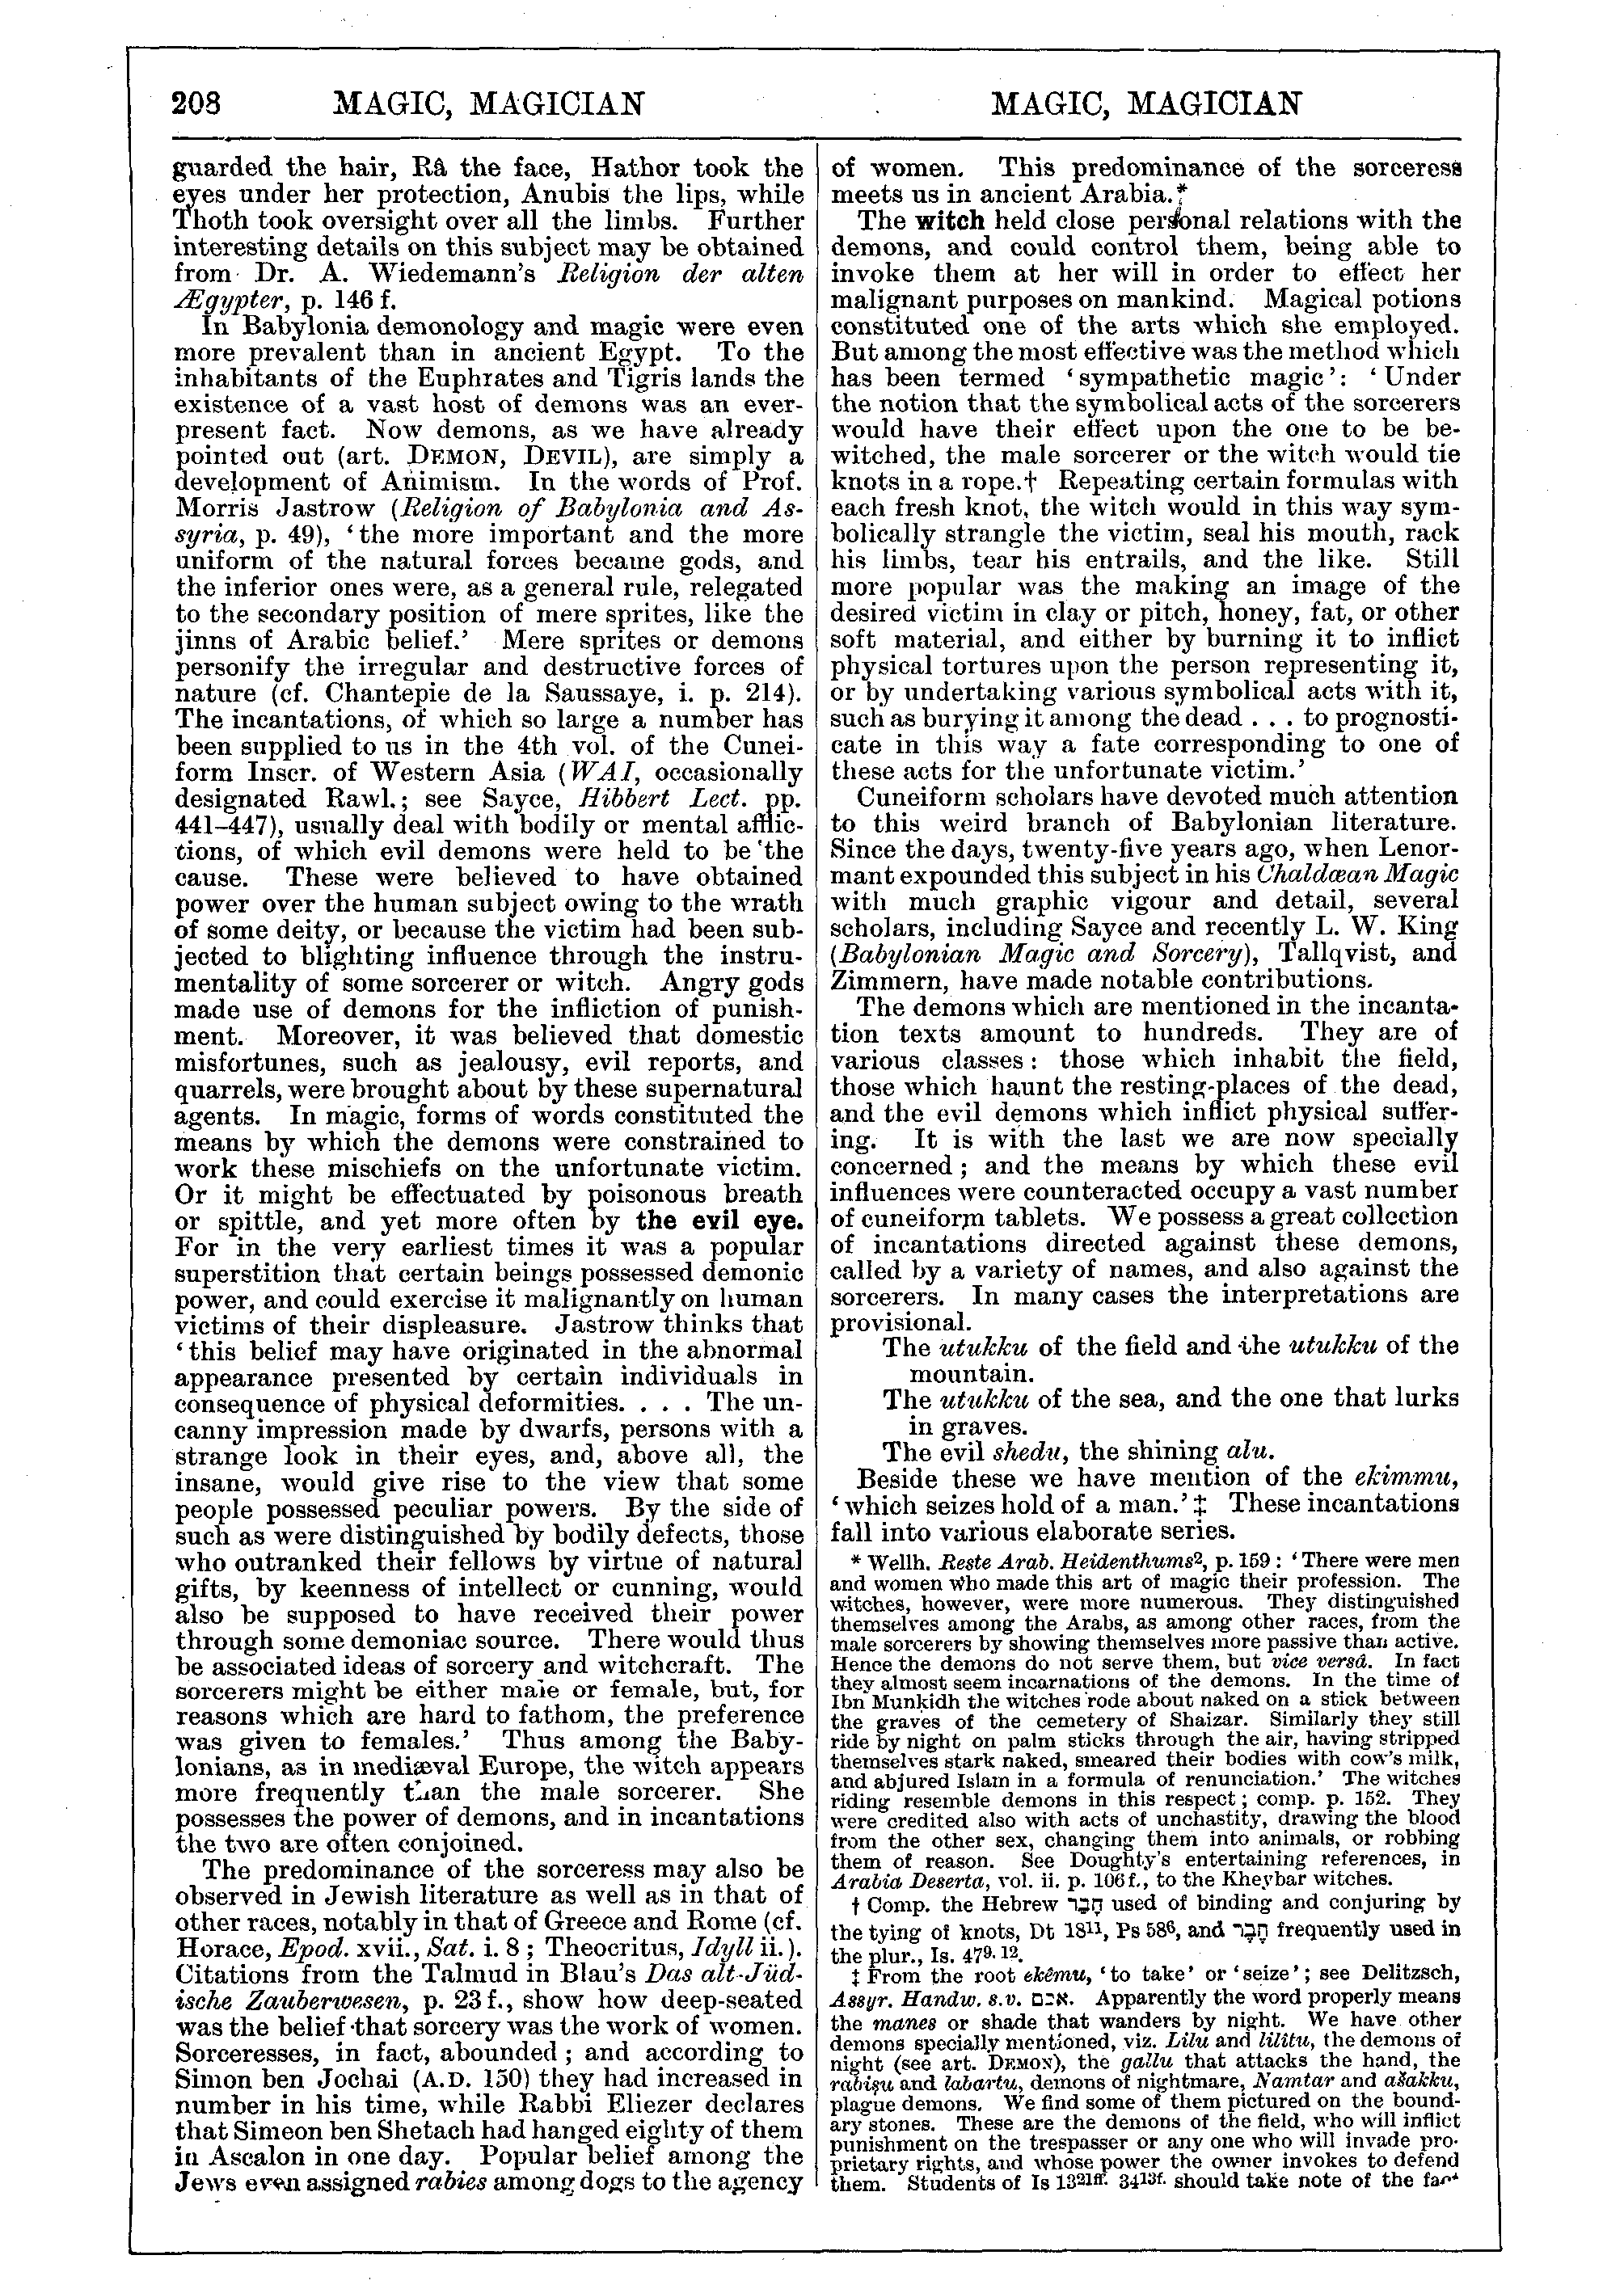 Image of page 208